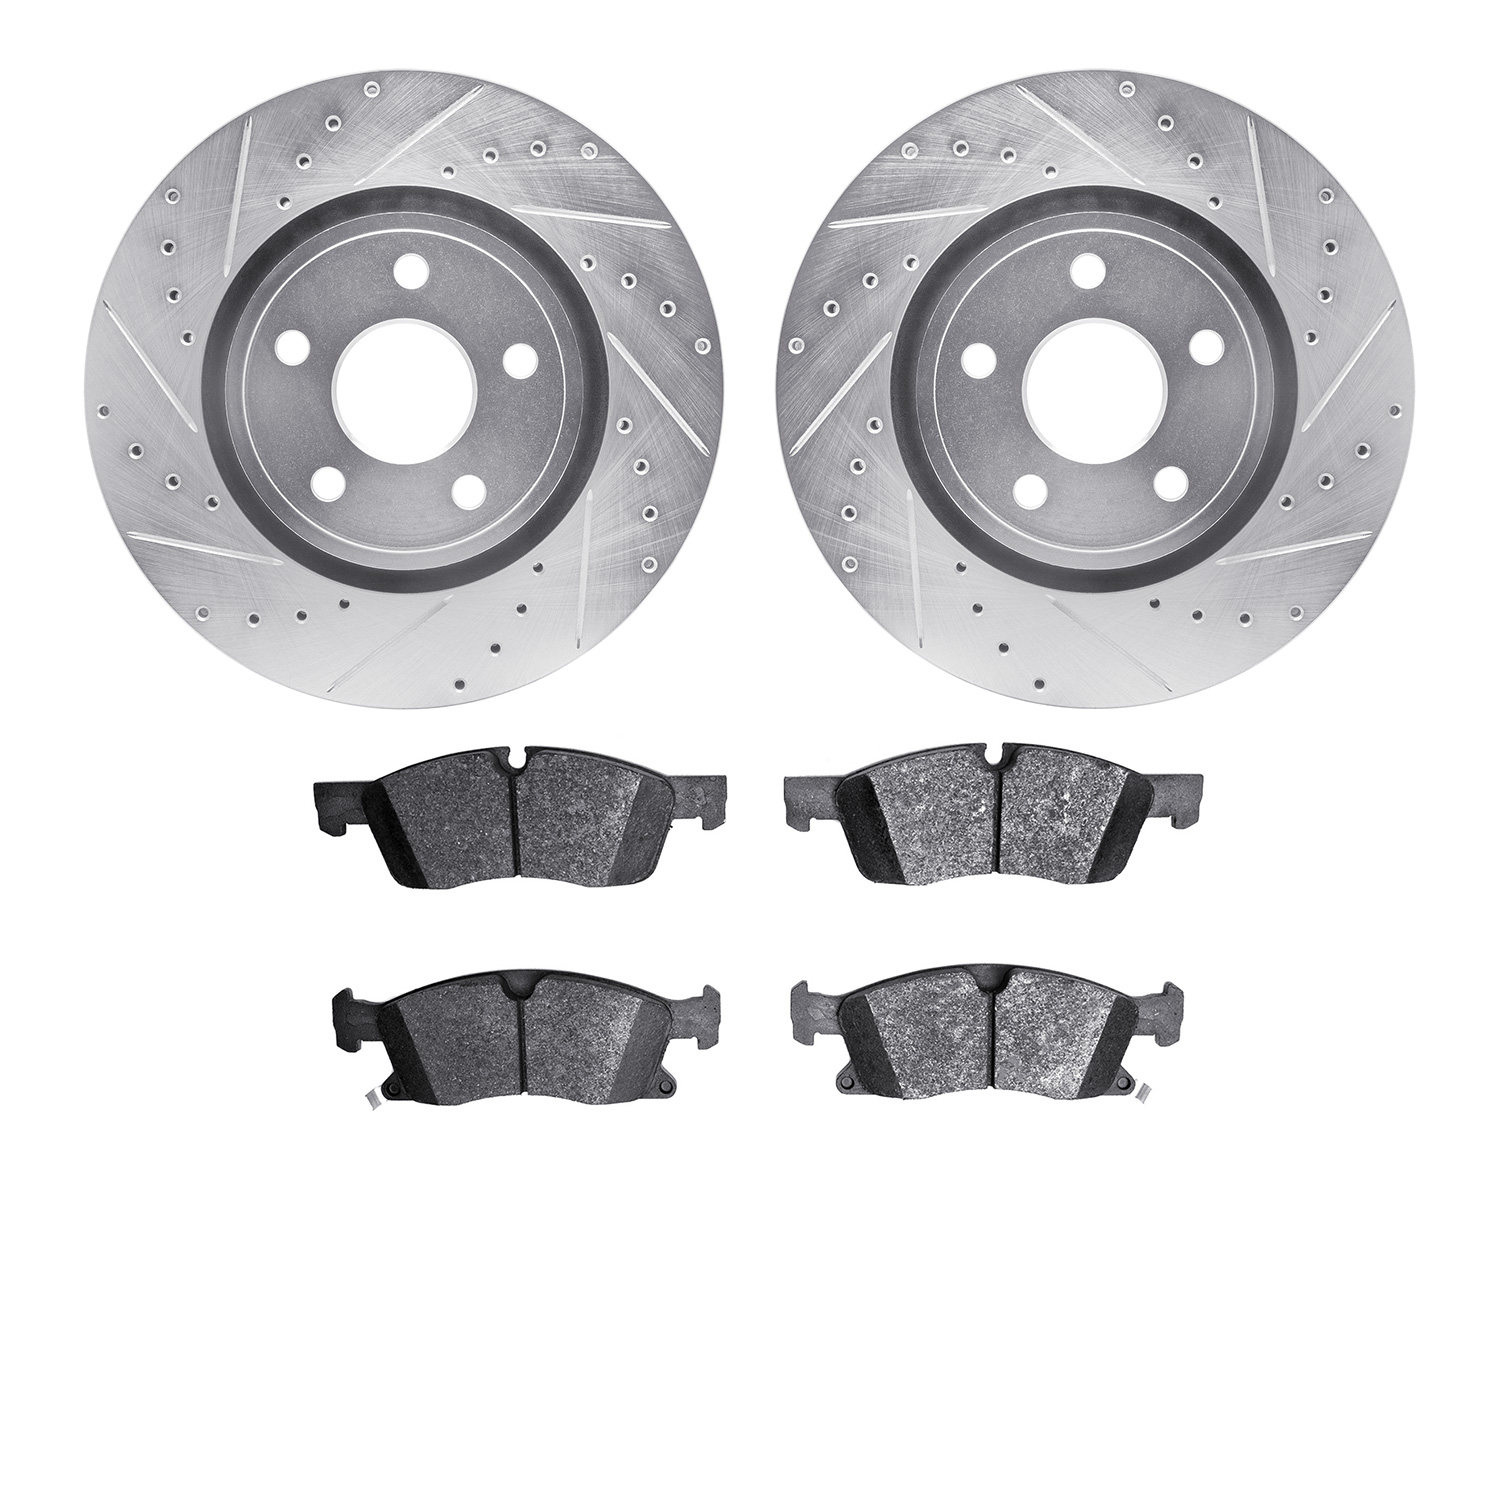 7402-42008 Drilled/Slotted Brake Rotors with Ultimate-Duty Brake Pads Kit [Silver], Fits Select Mopar, Position: Front